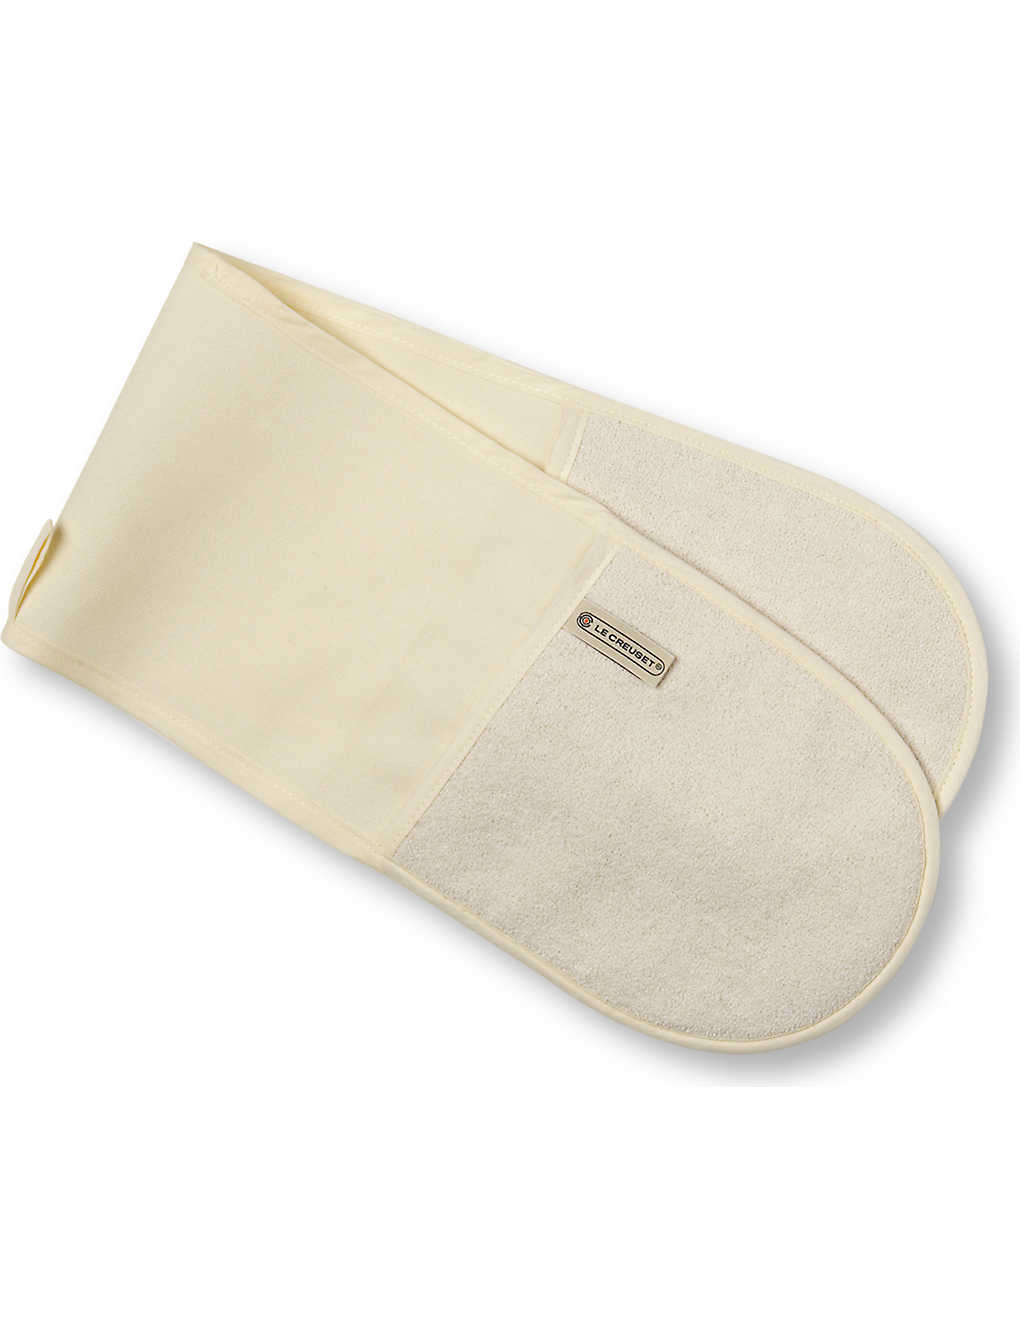 Le Creuset Double Hand Glove - Cream - One Size